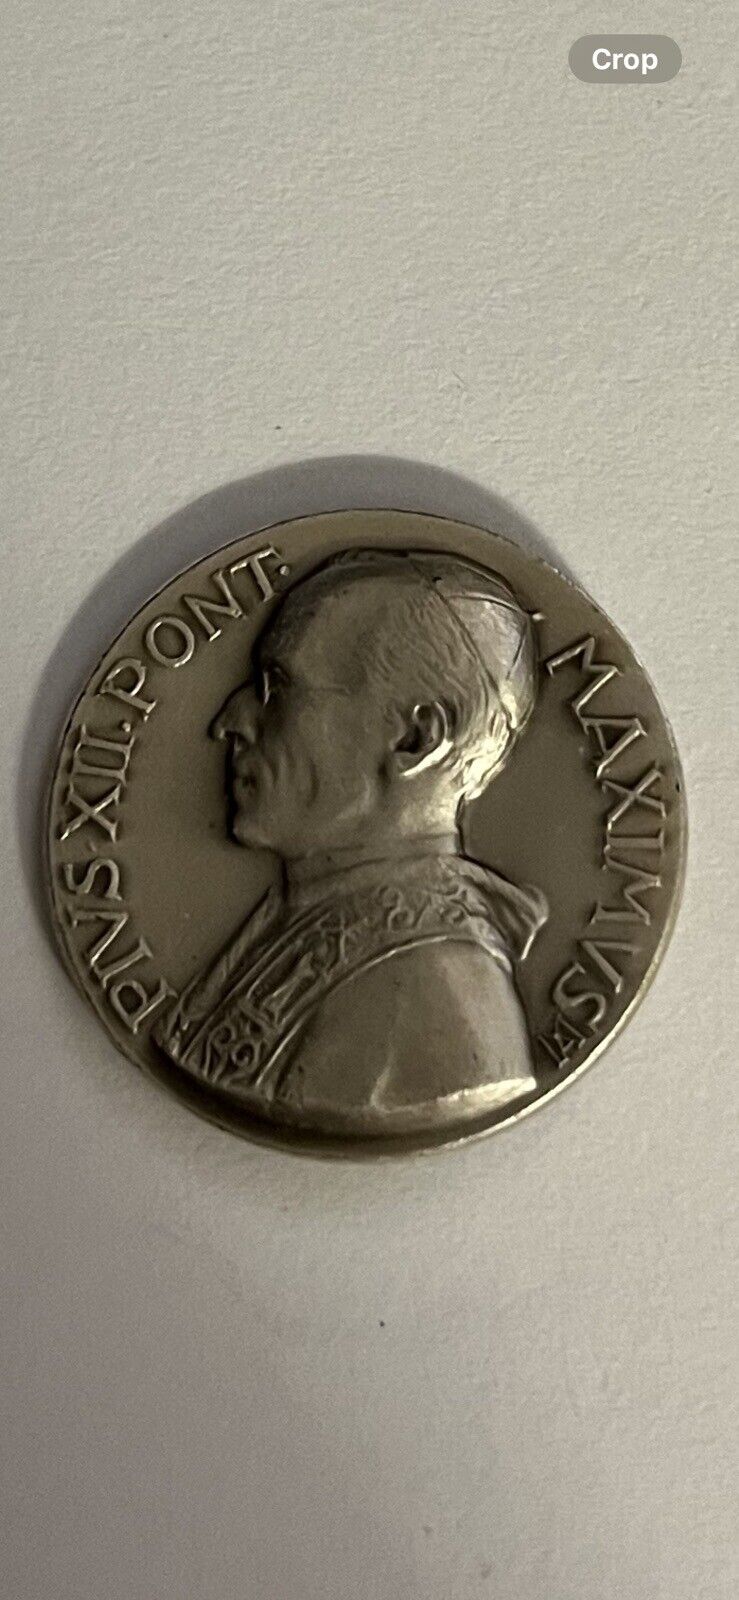 PIVS XII .Pont MAXTMVS 1939-1958 Religious Pope Commemorative Medal Size Small